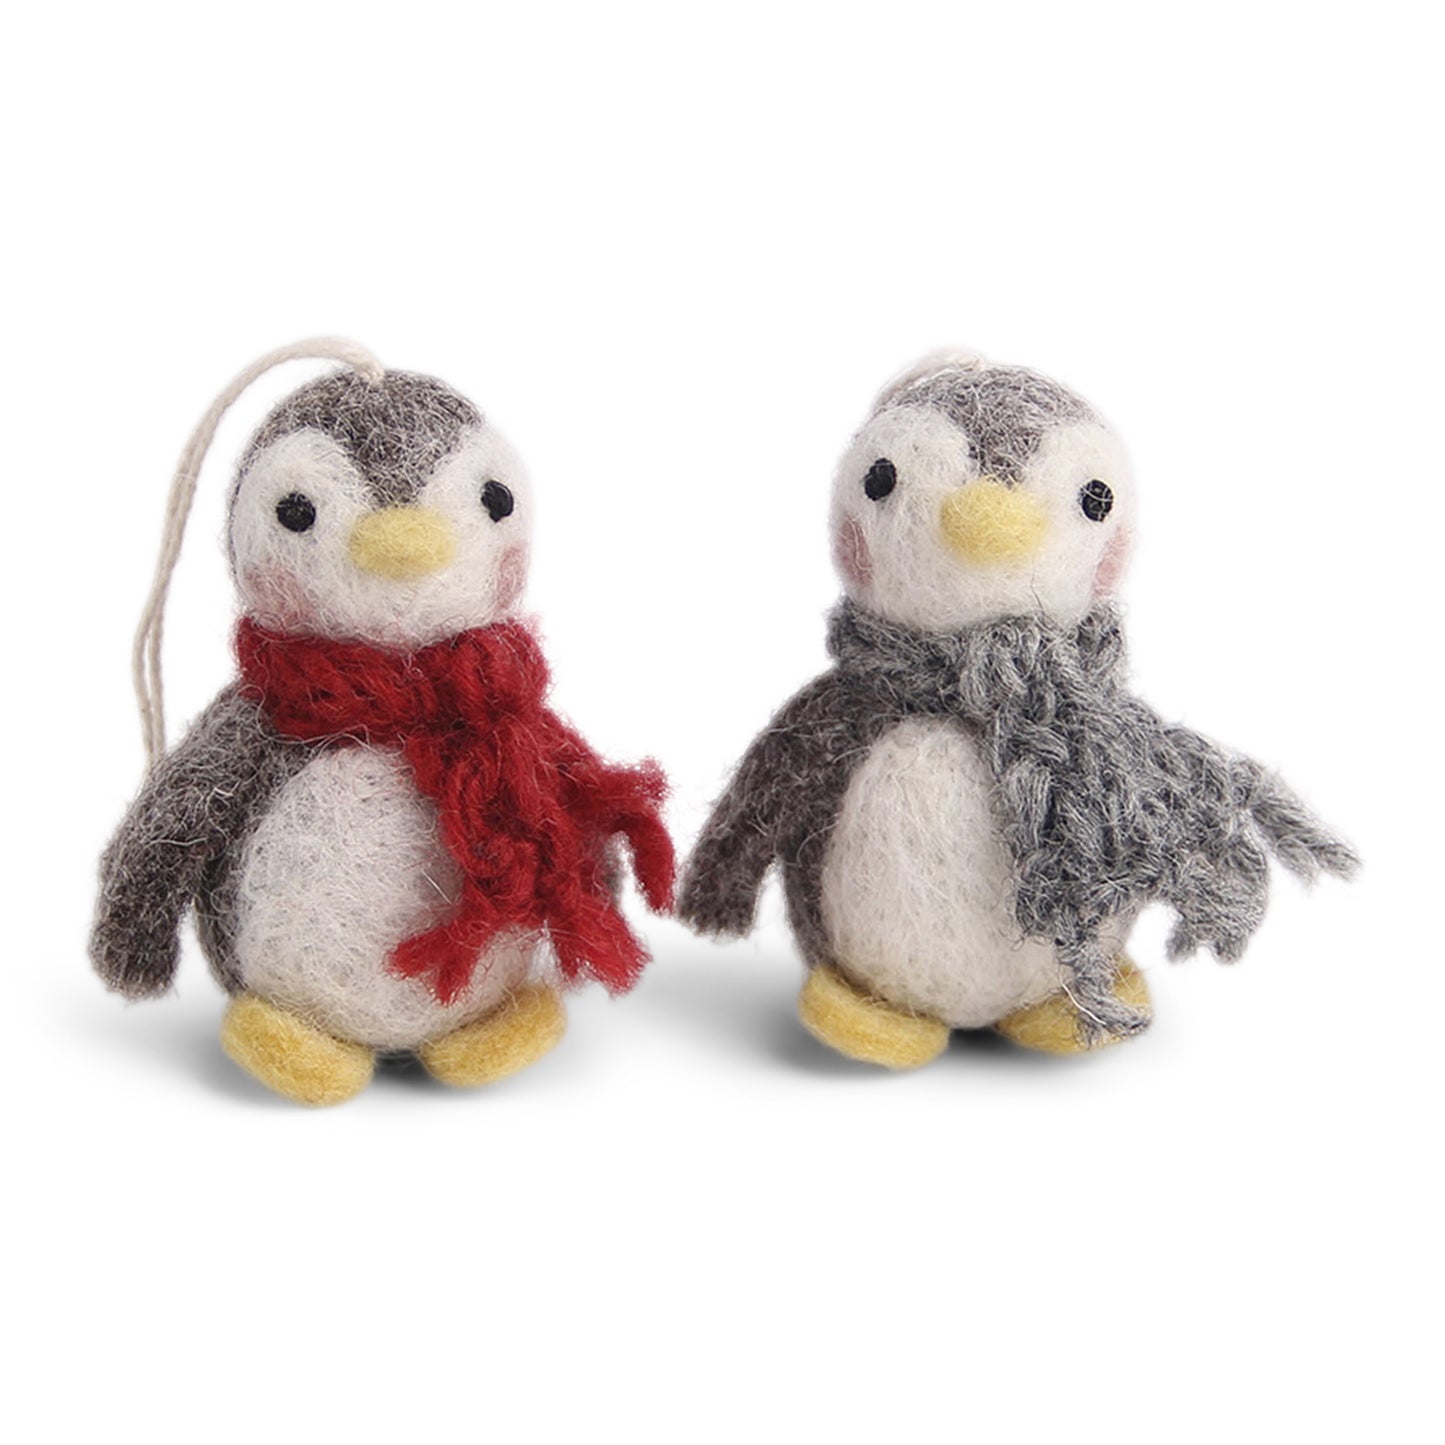 Gry & Sif Baby Penguin Classic Decoration 3pk